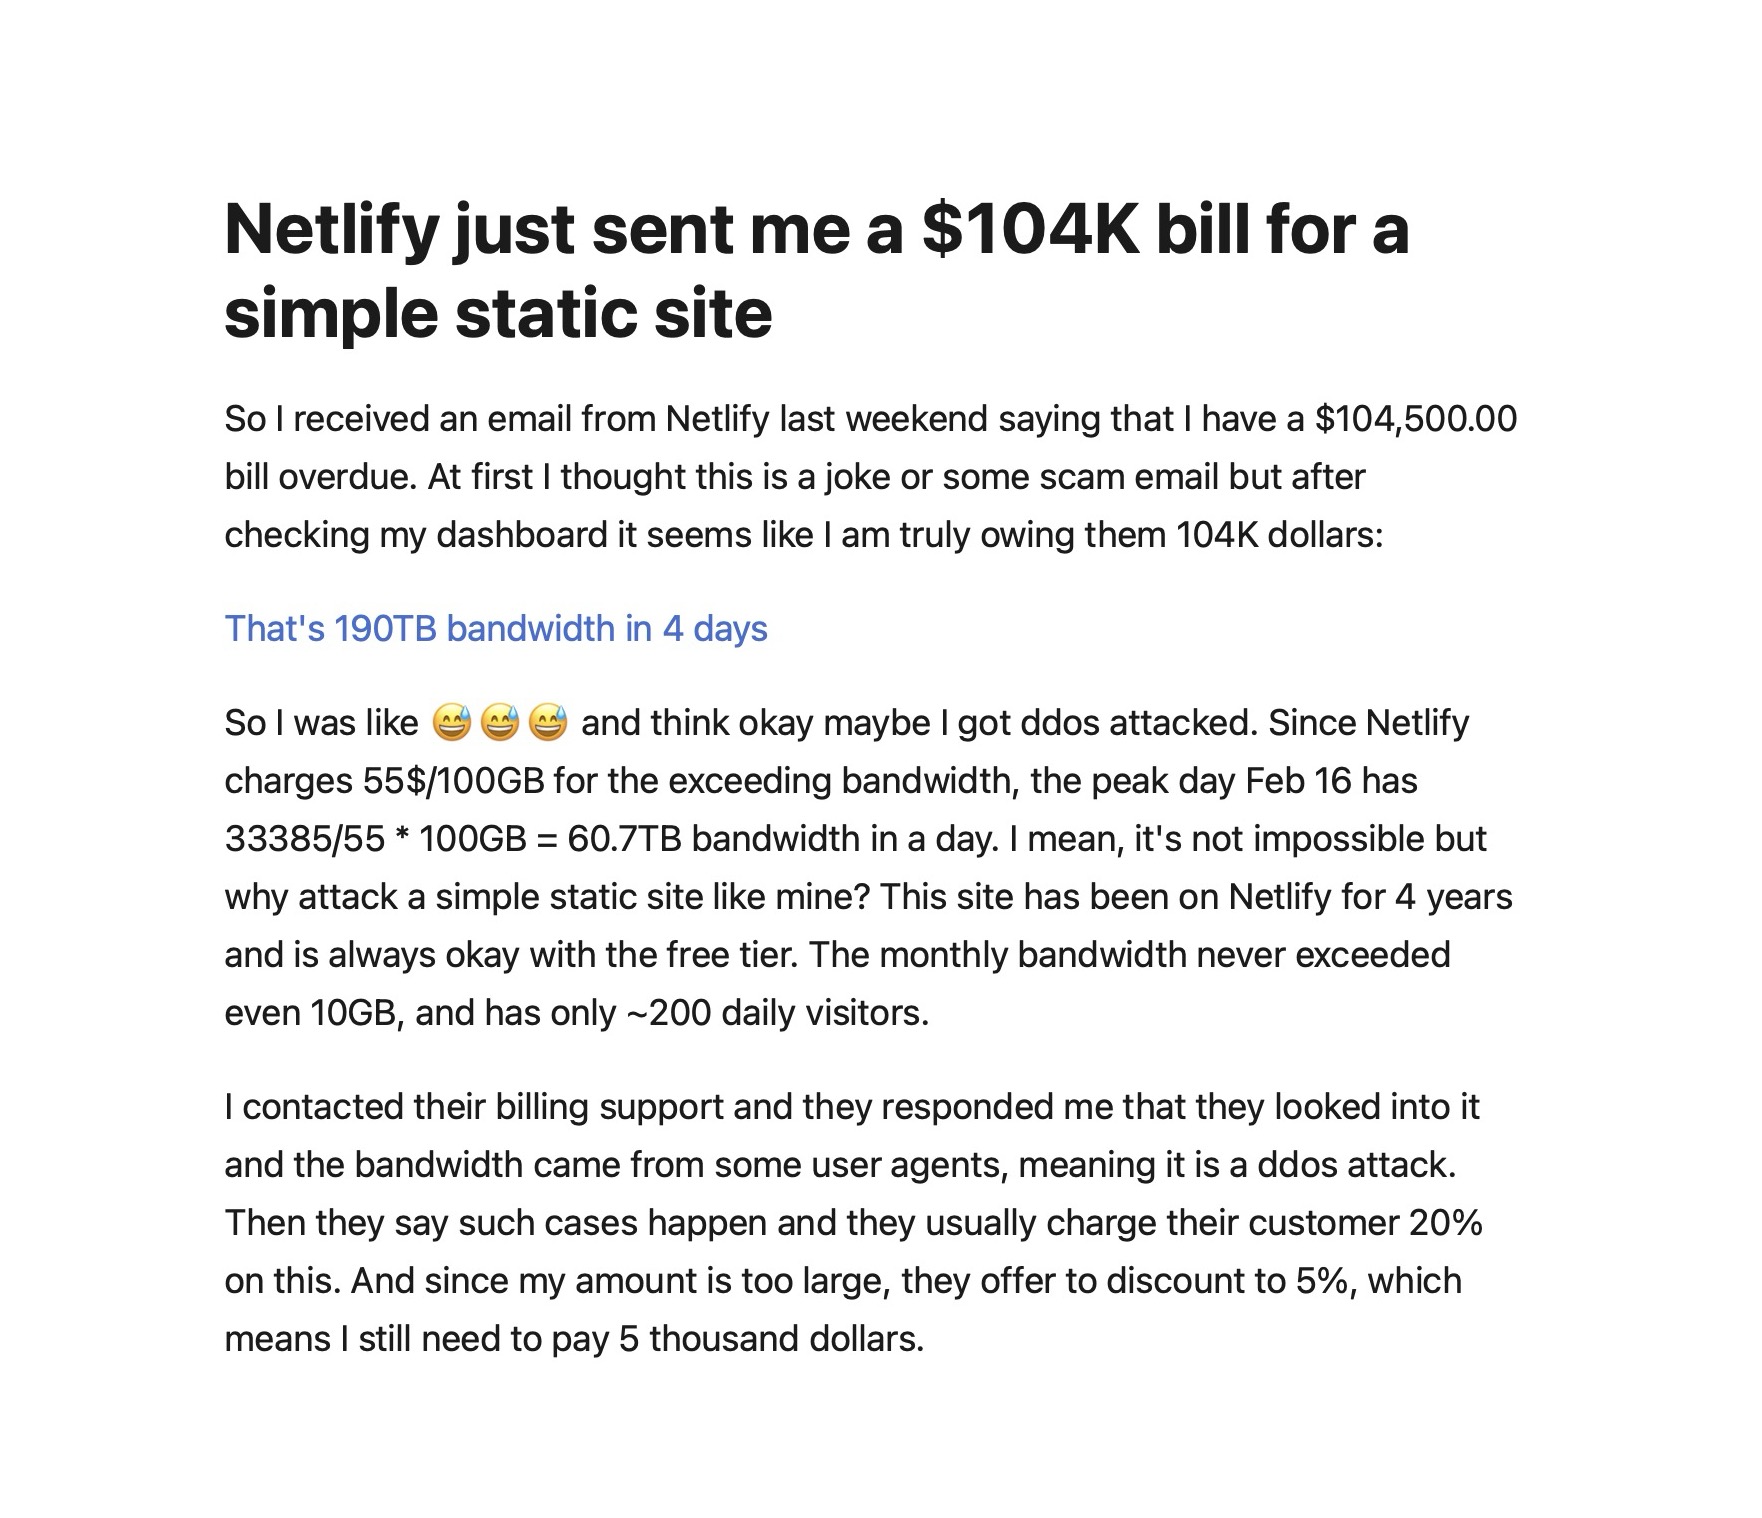 Photo from Twitter about a $104K bill from Netlify